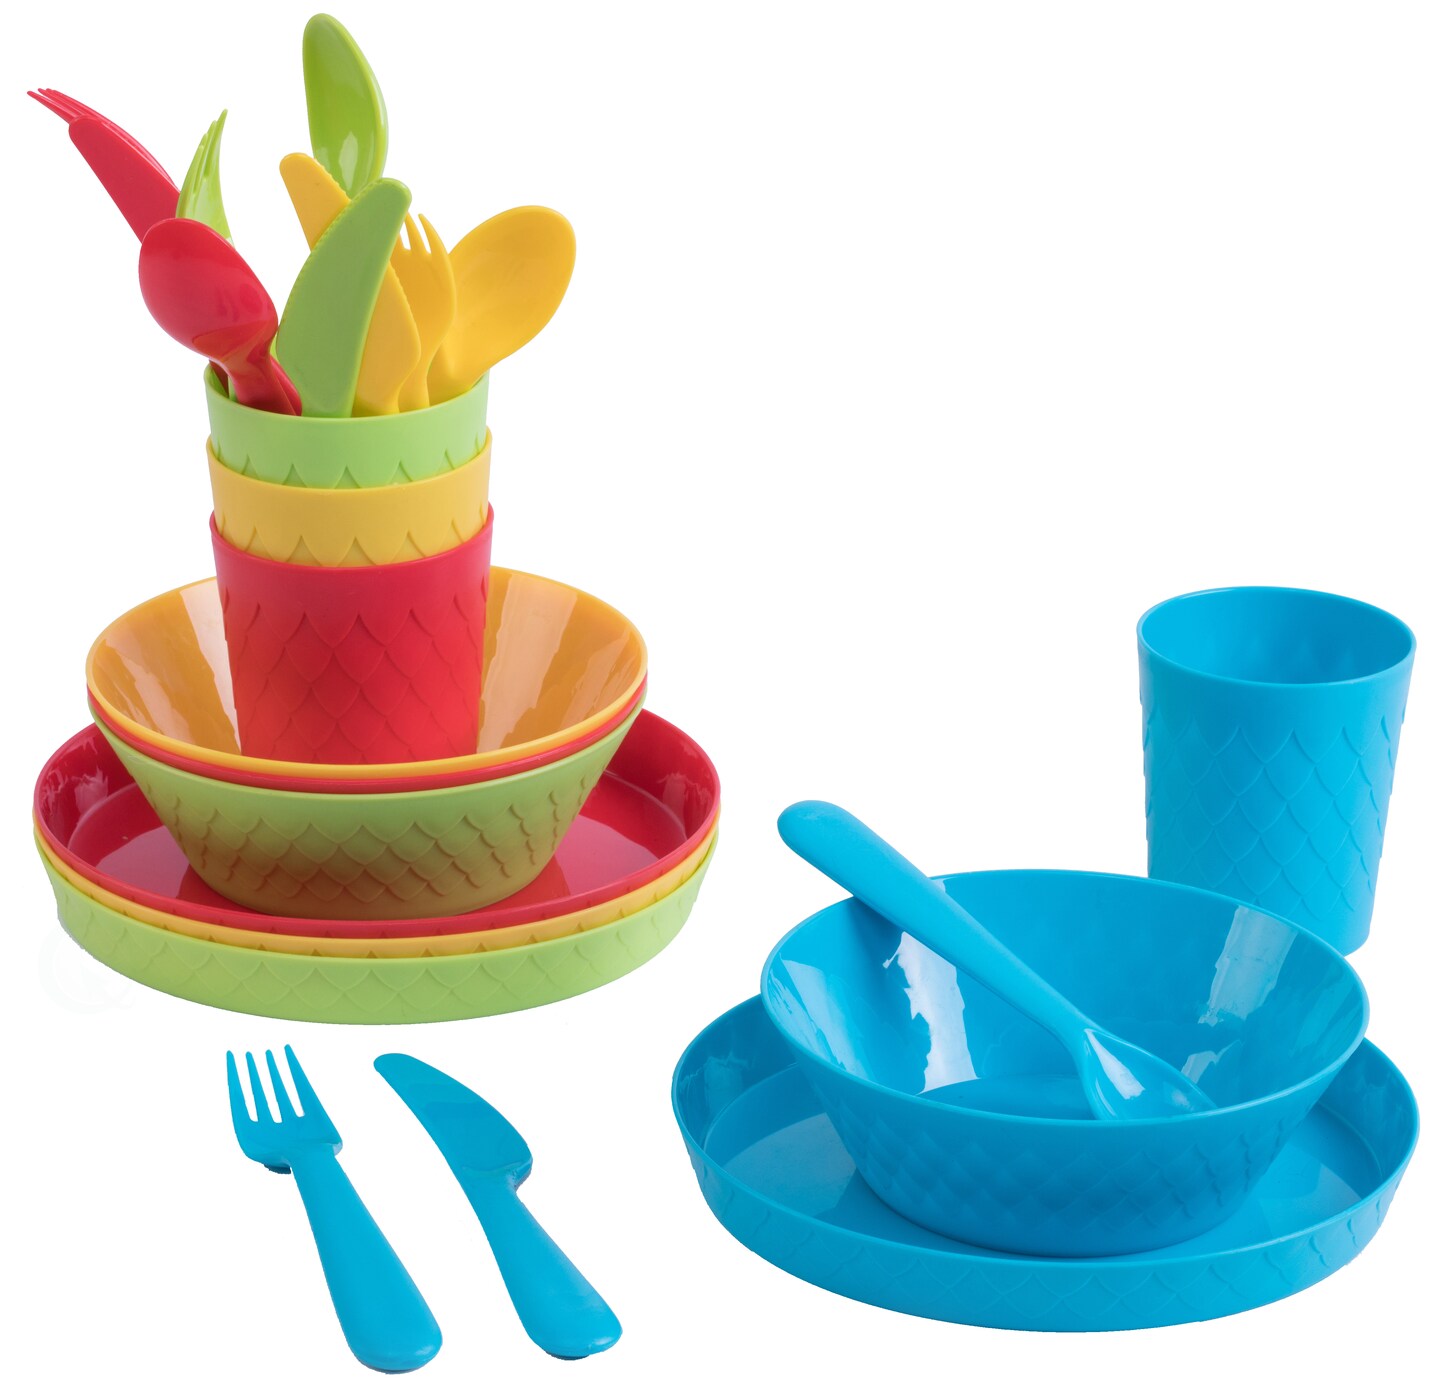 24-Piece Kids Dinnerware Set Plastic 4 Plates, 4 Bowls, 4 Cups, 4 Forks, 4 Knives, and 4 Spoons